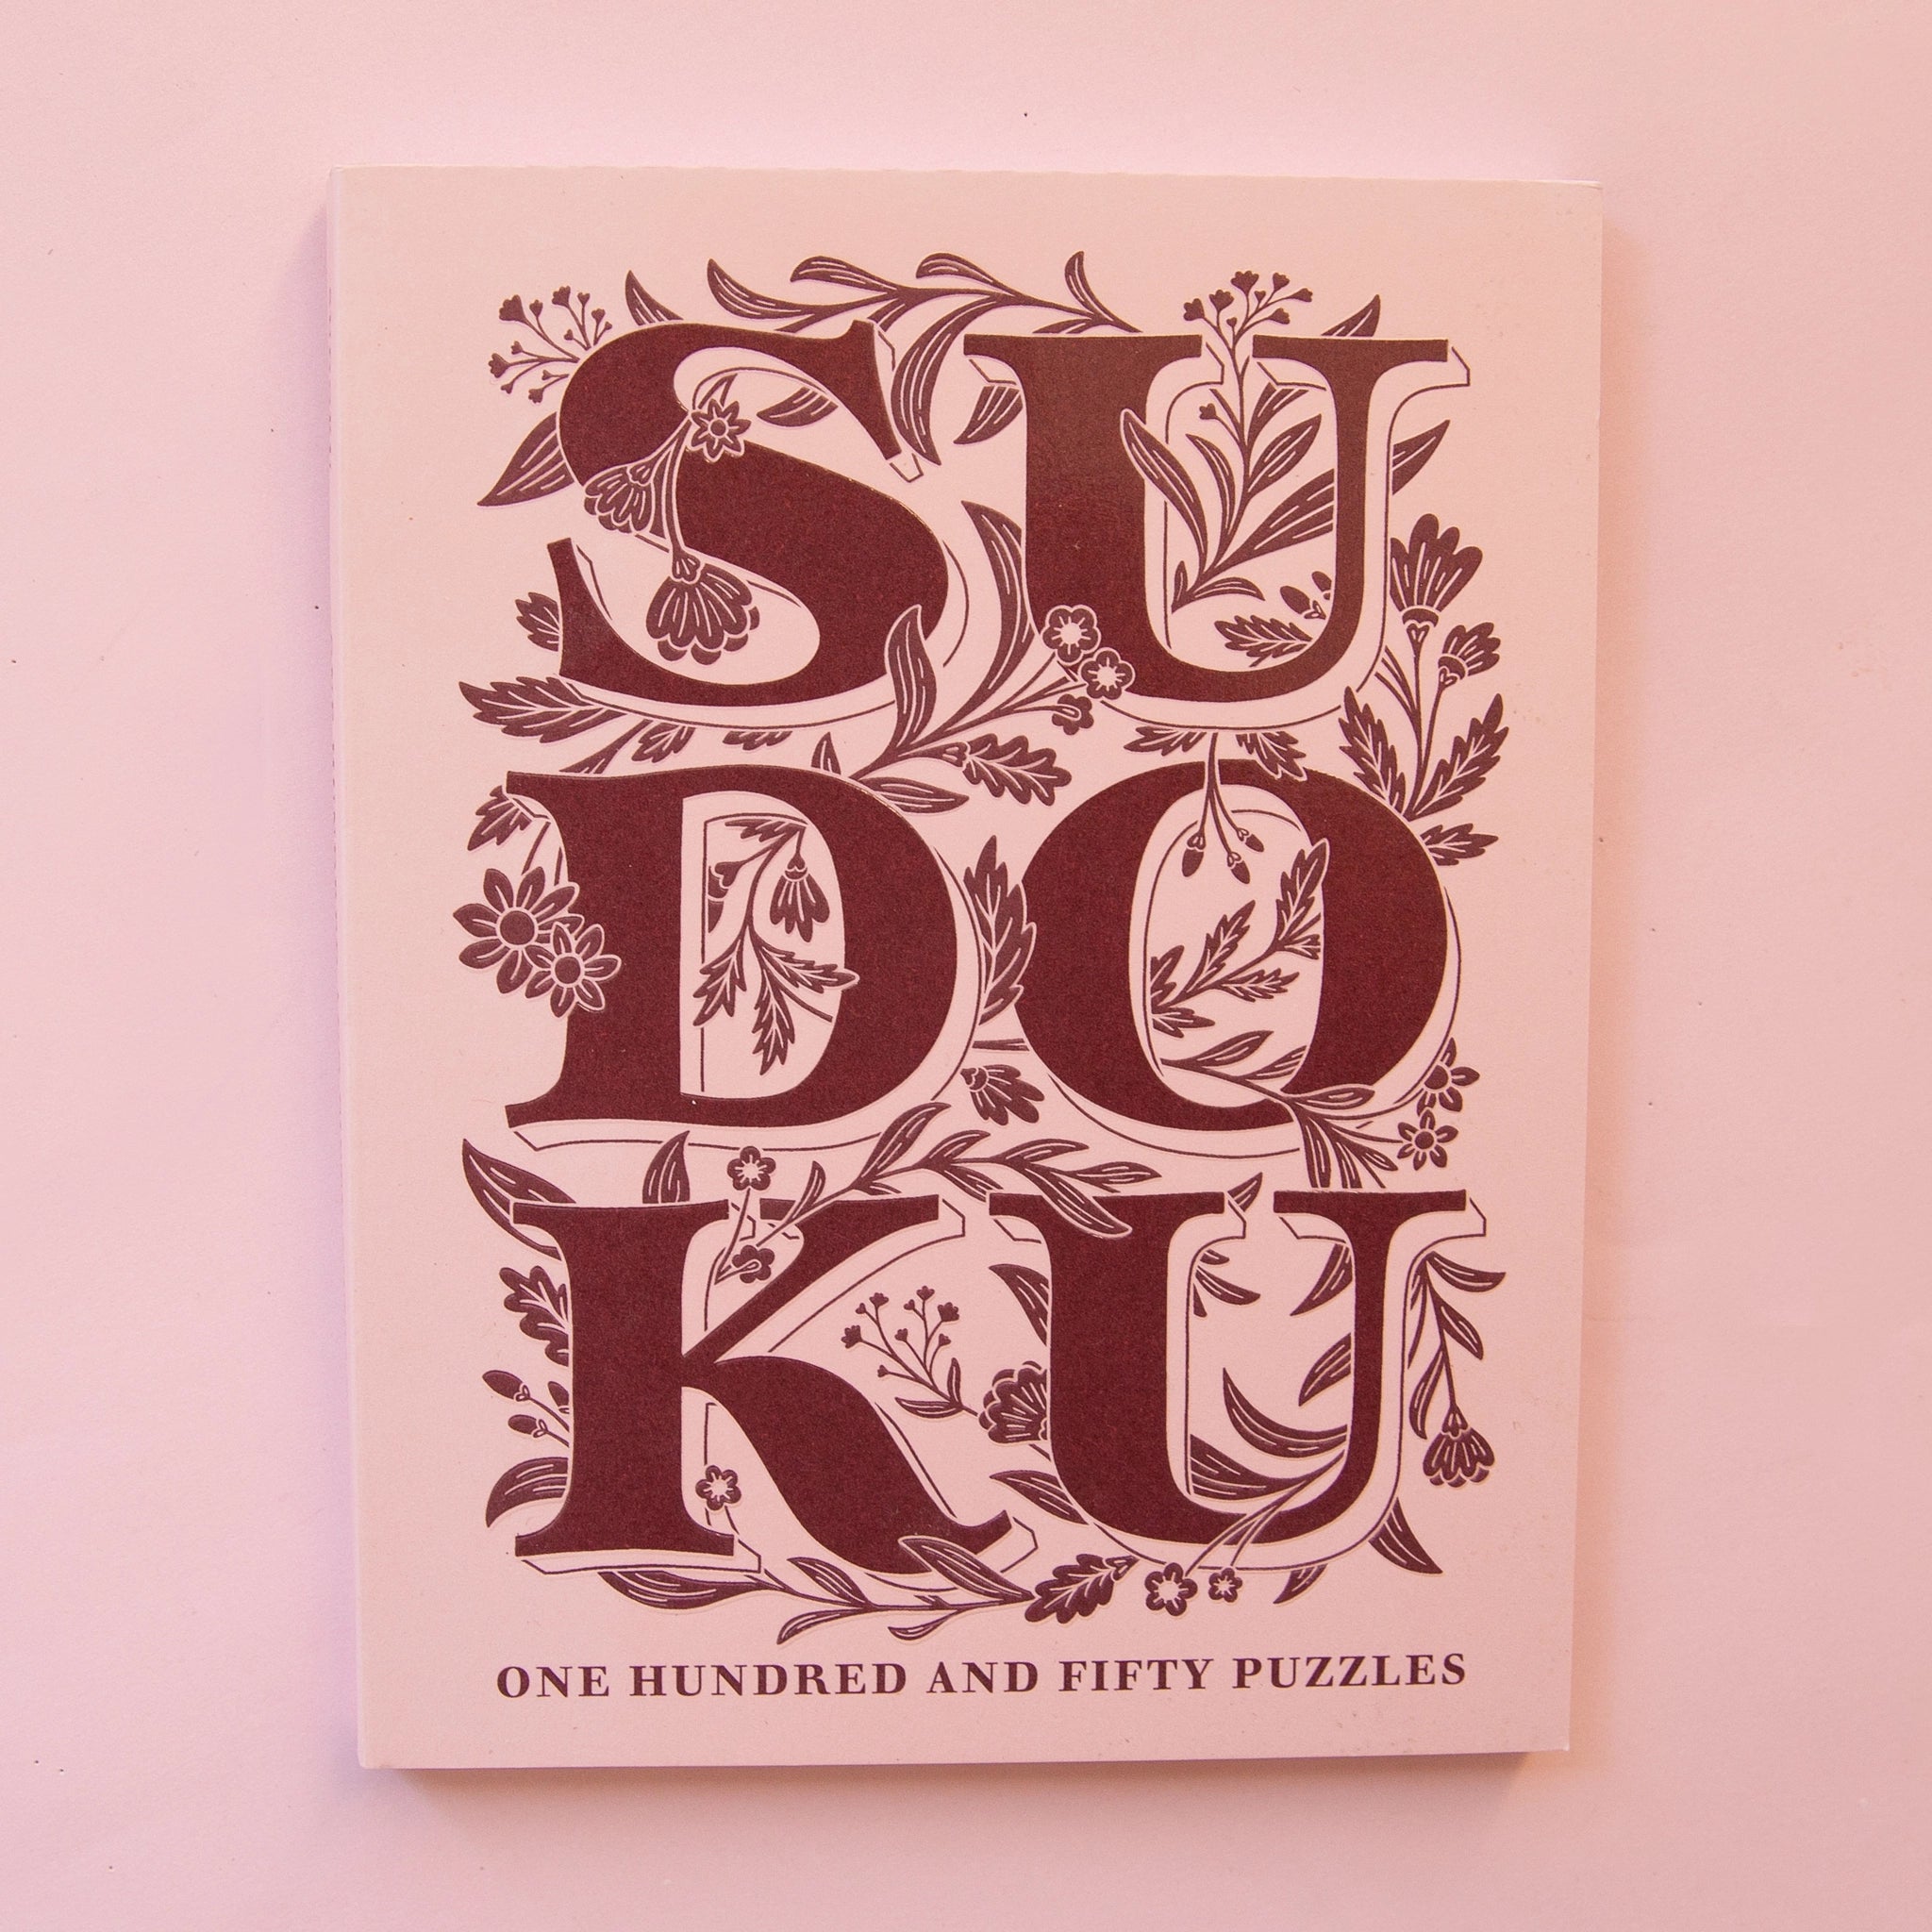 Pastel pink paperback puzzle book titled &#39;Sudoku&#39; in large magenta capital lettering. The letters are accented with delightful floral detailing. Below the large lettering reads &#39;One hundred and fifty puzzles&#39; towards the bottom of the cover.